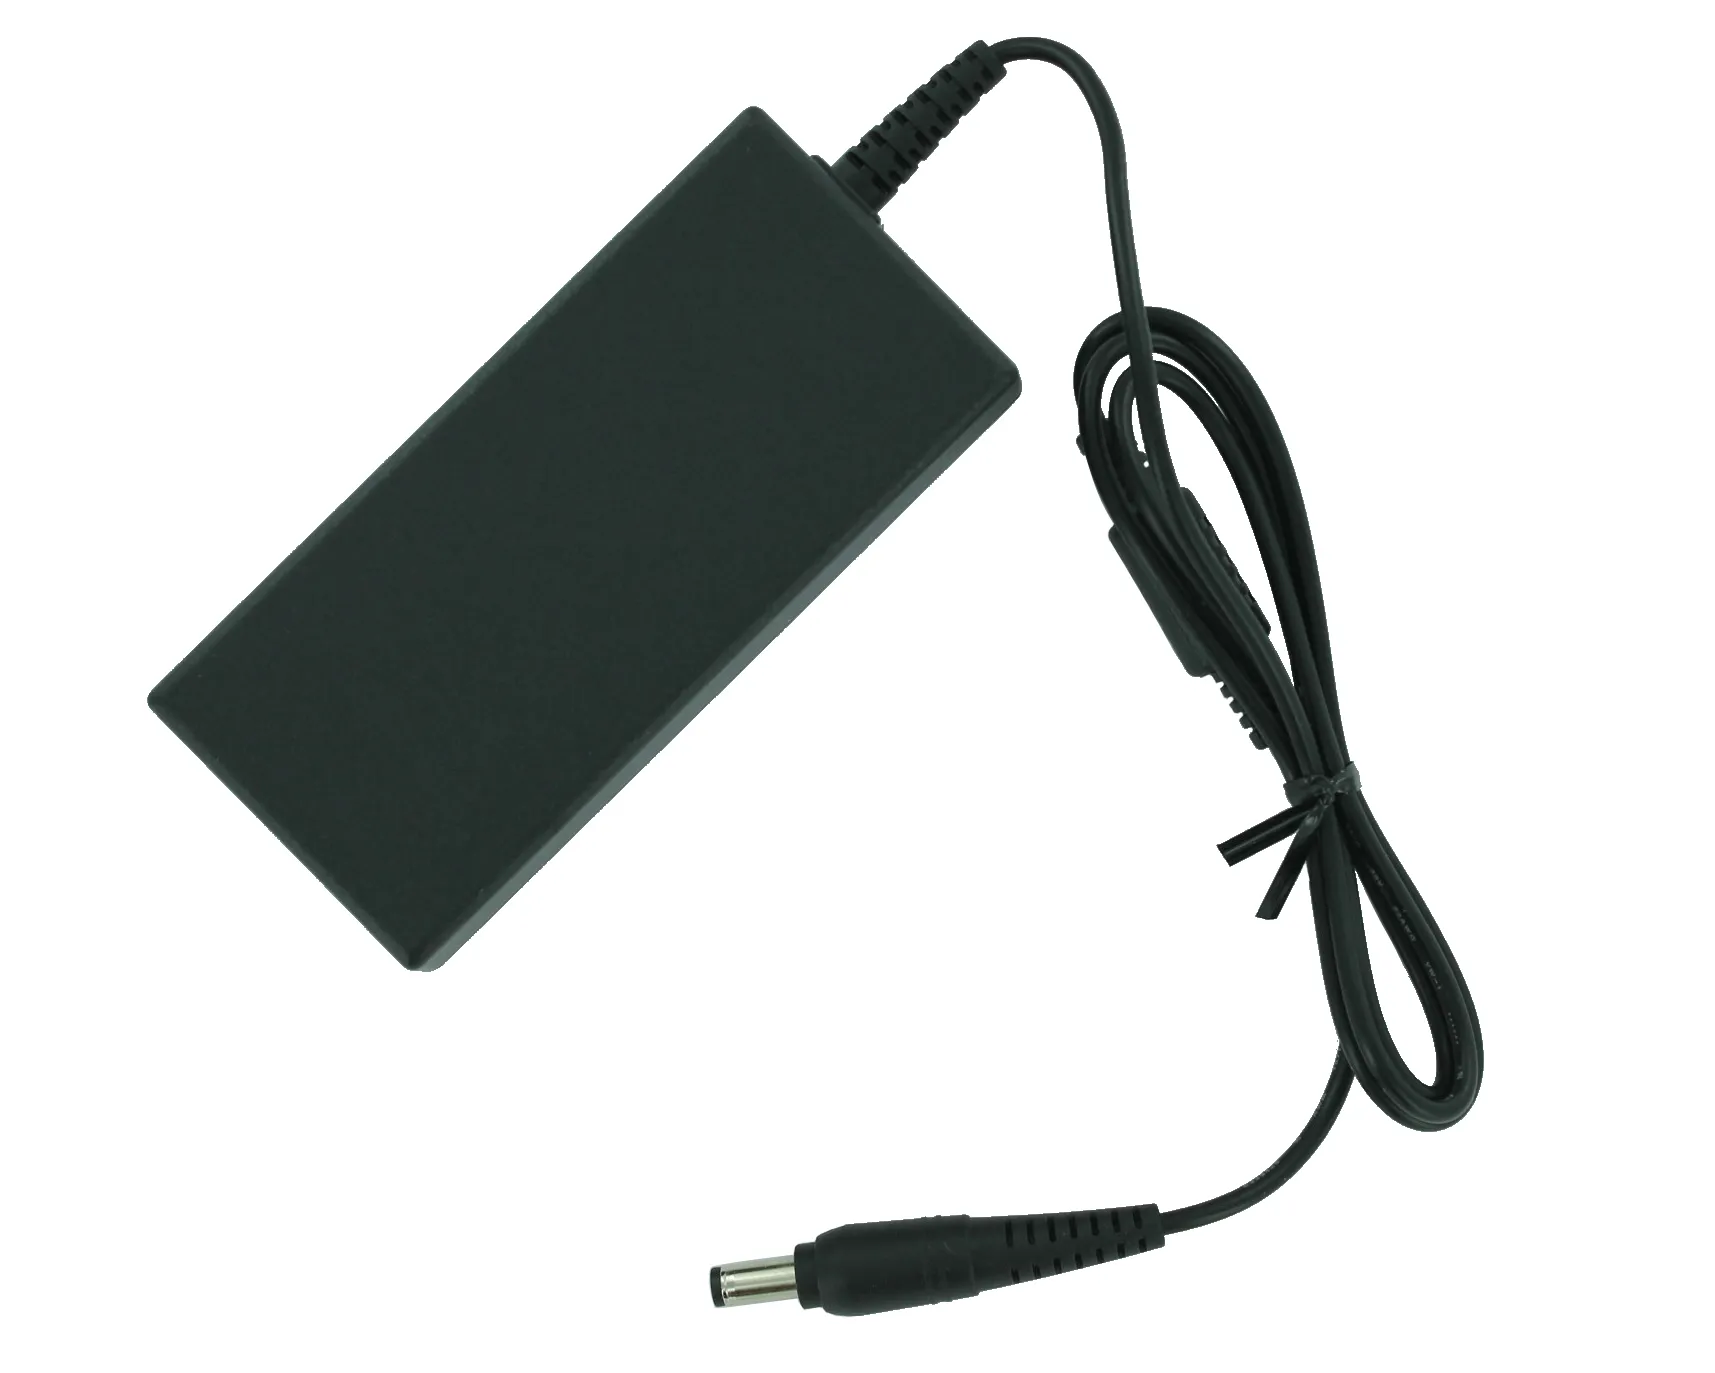 HP 280 G3 MICROTOWER PC - 3ZD93ES Charger (AC Adapter) 911754-001